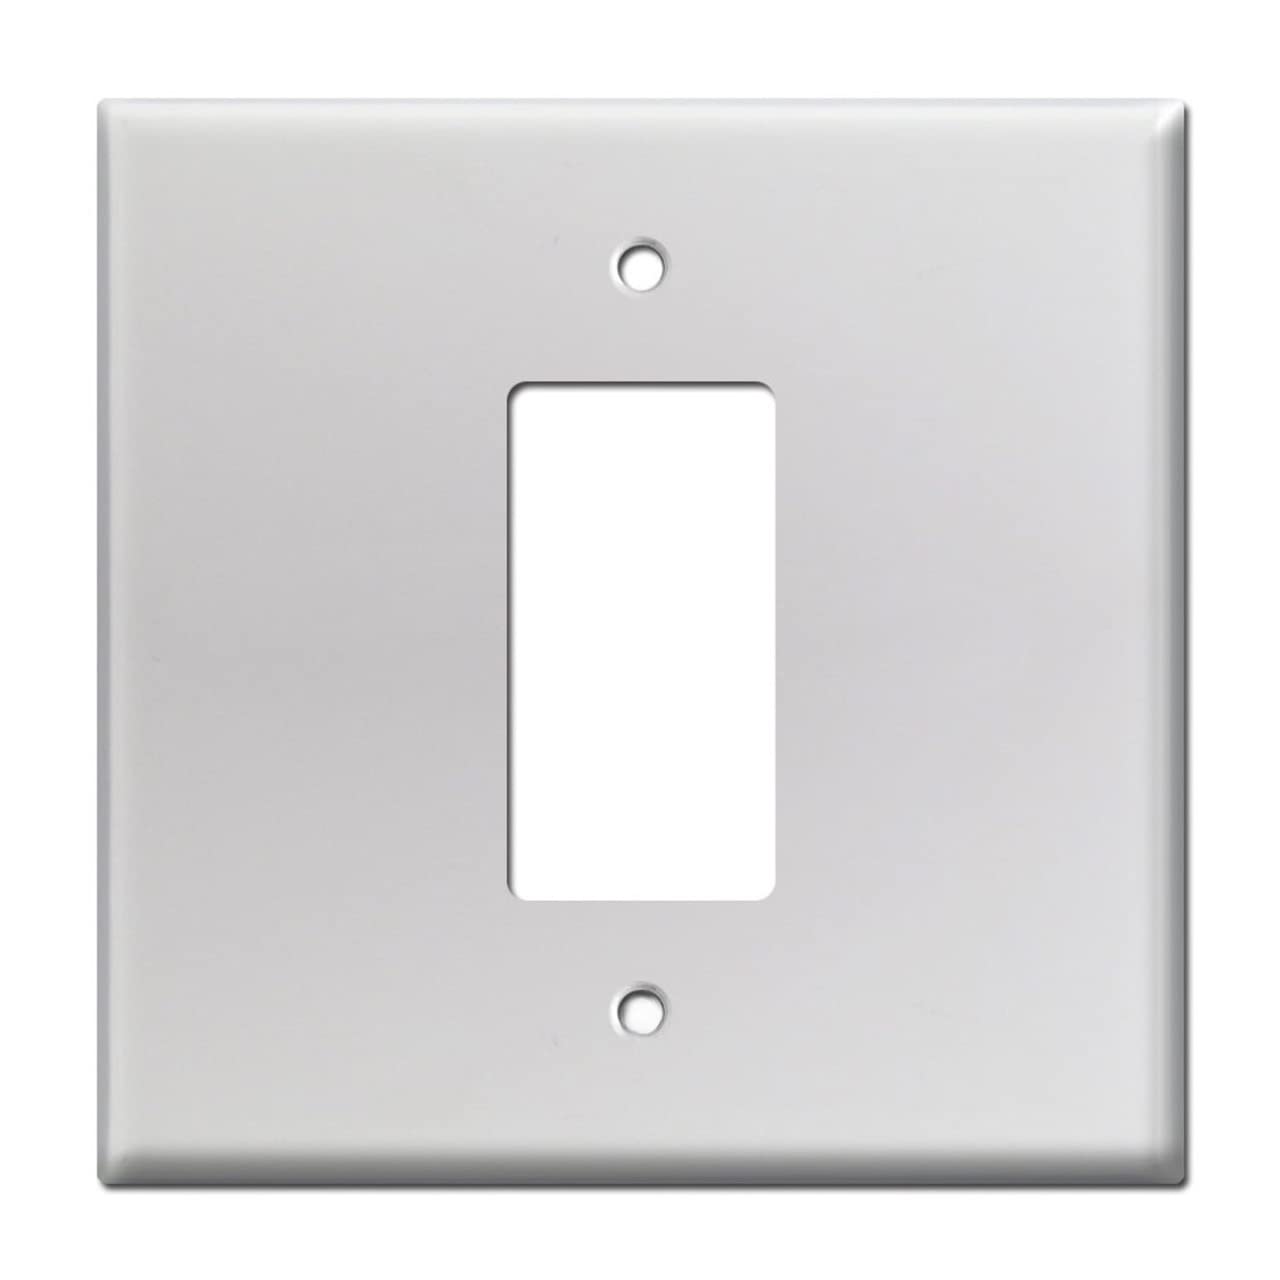 Oversized Metal Light Switch Plate 5.5” Jumbo 2 Gang 1 Centered White Extra Large Size Smooth Wall Outlet Blank One Single Rocker Double Gang Cover